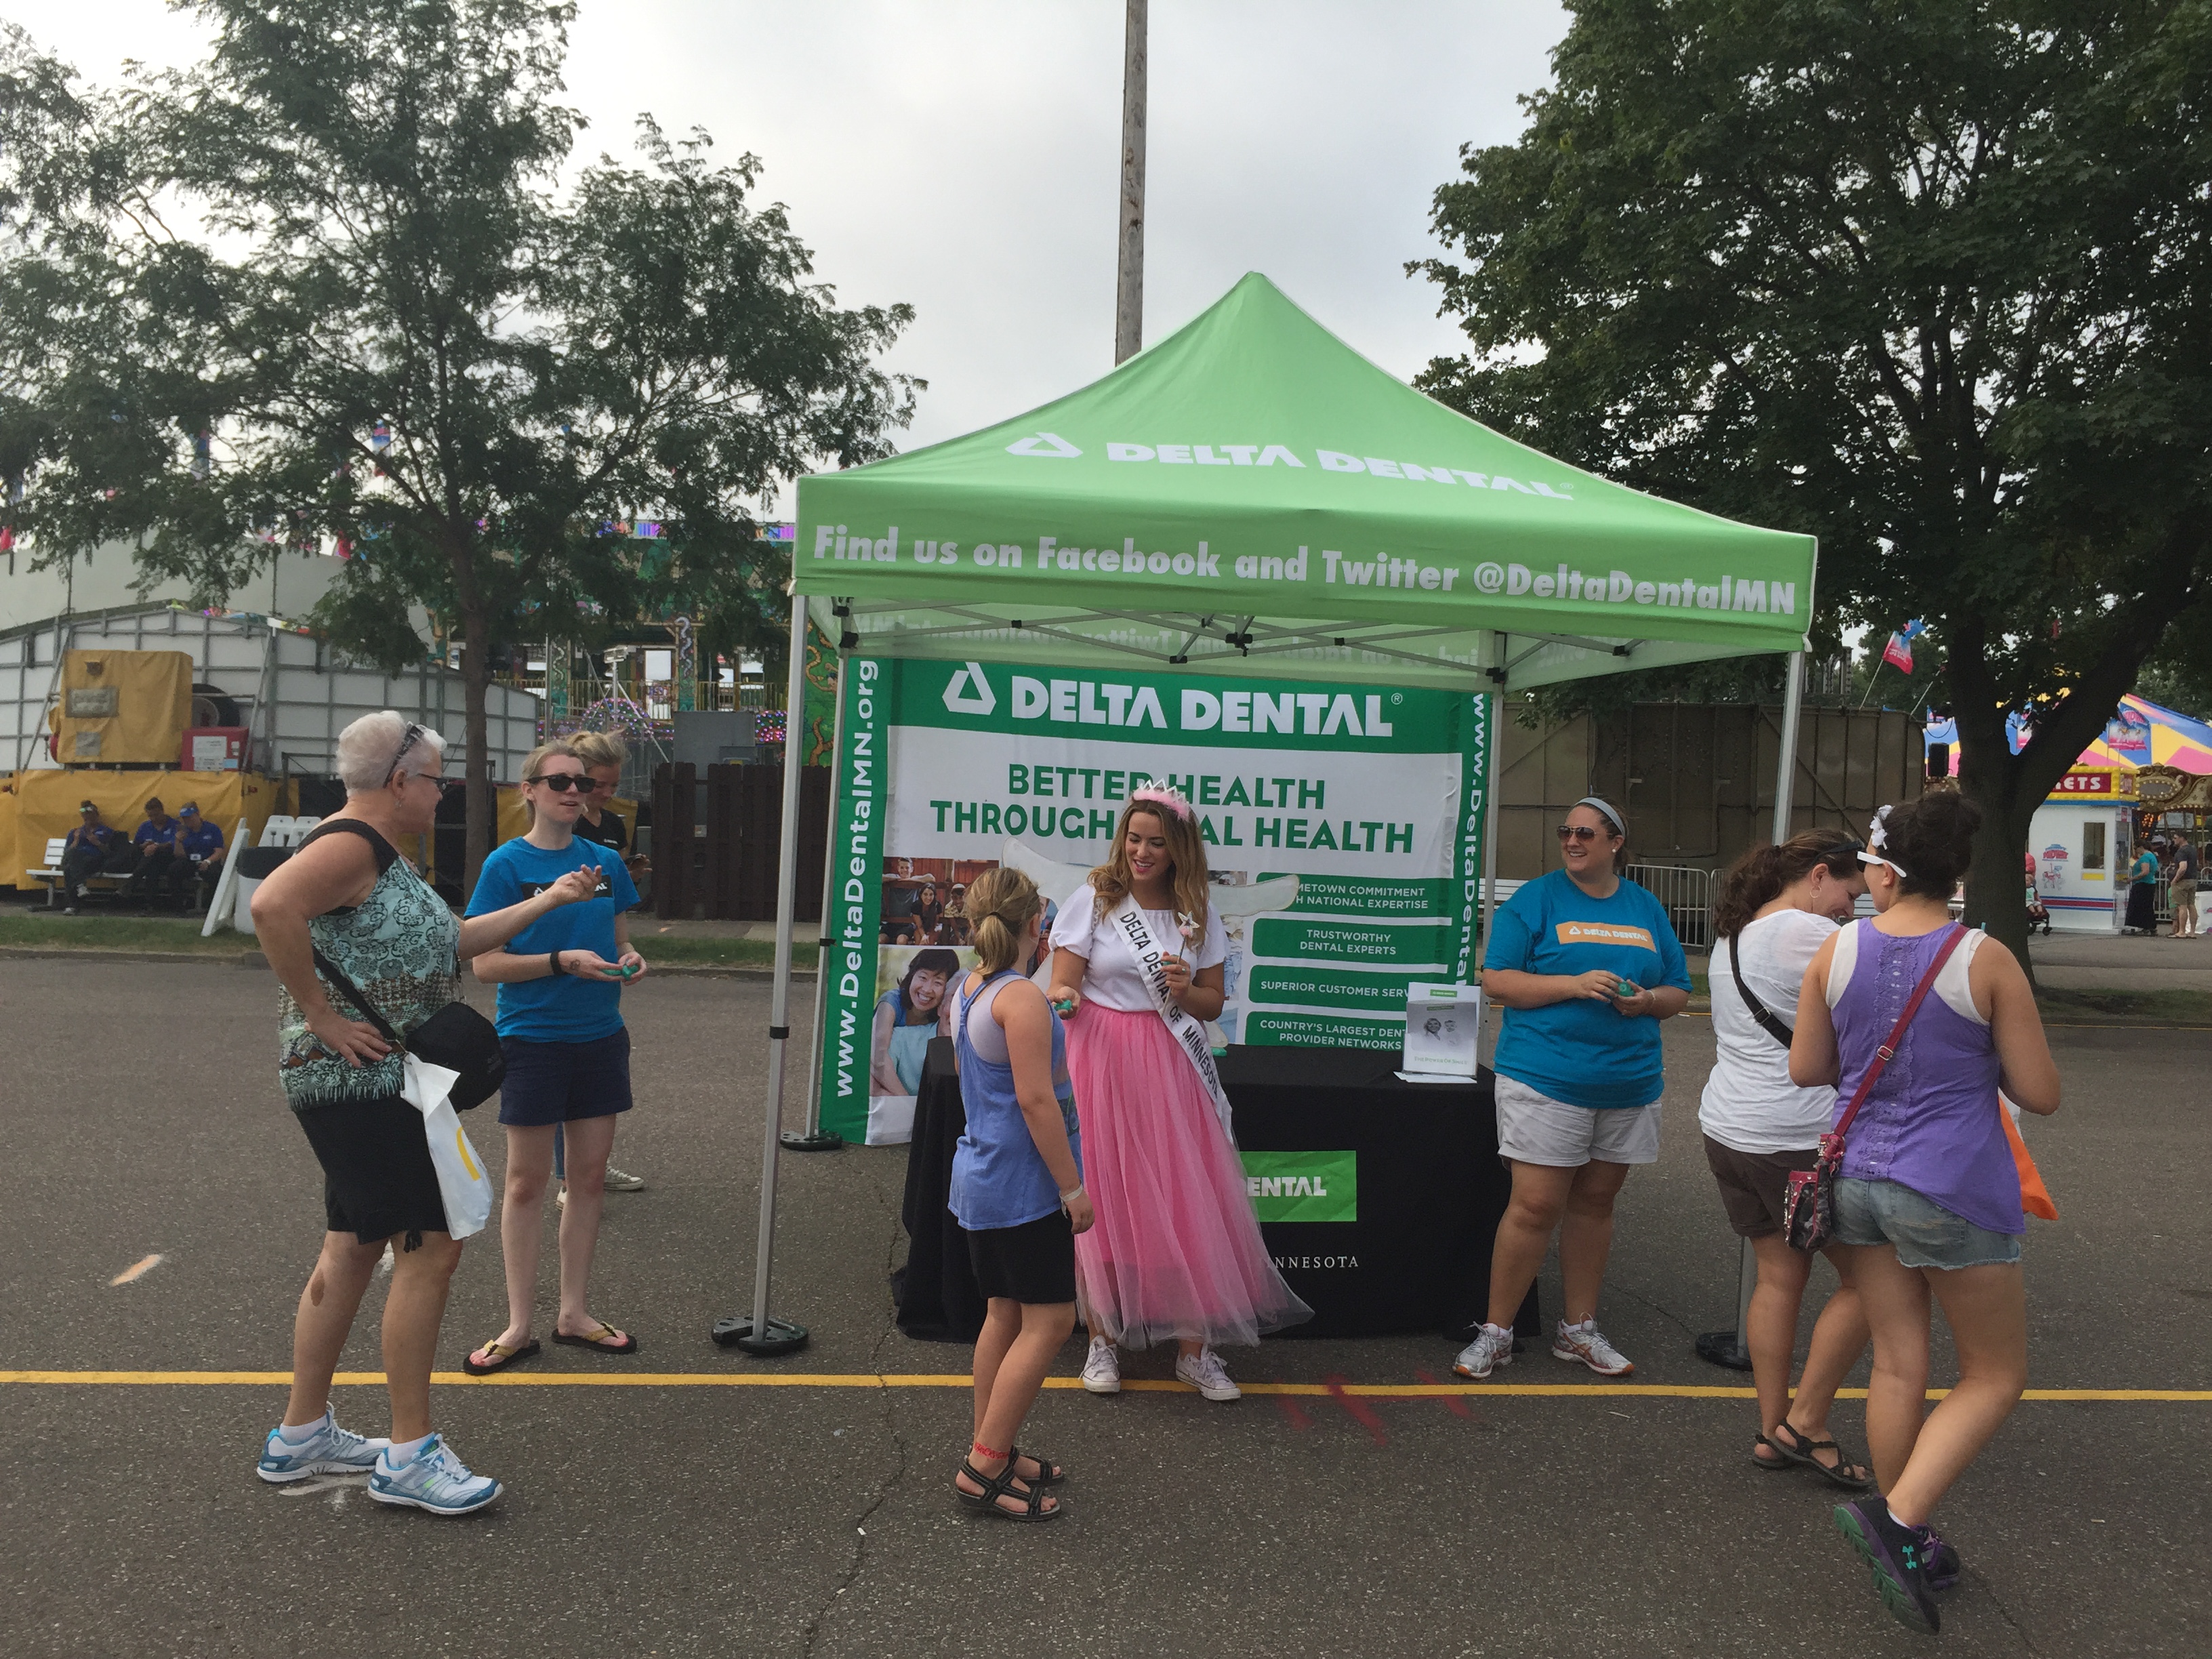 Delta Dental employees talking to fair goes at the great Minnesota get together 2015